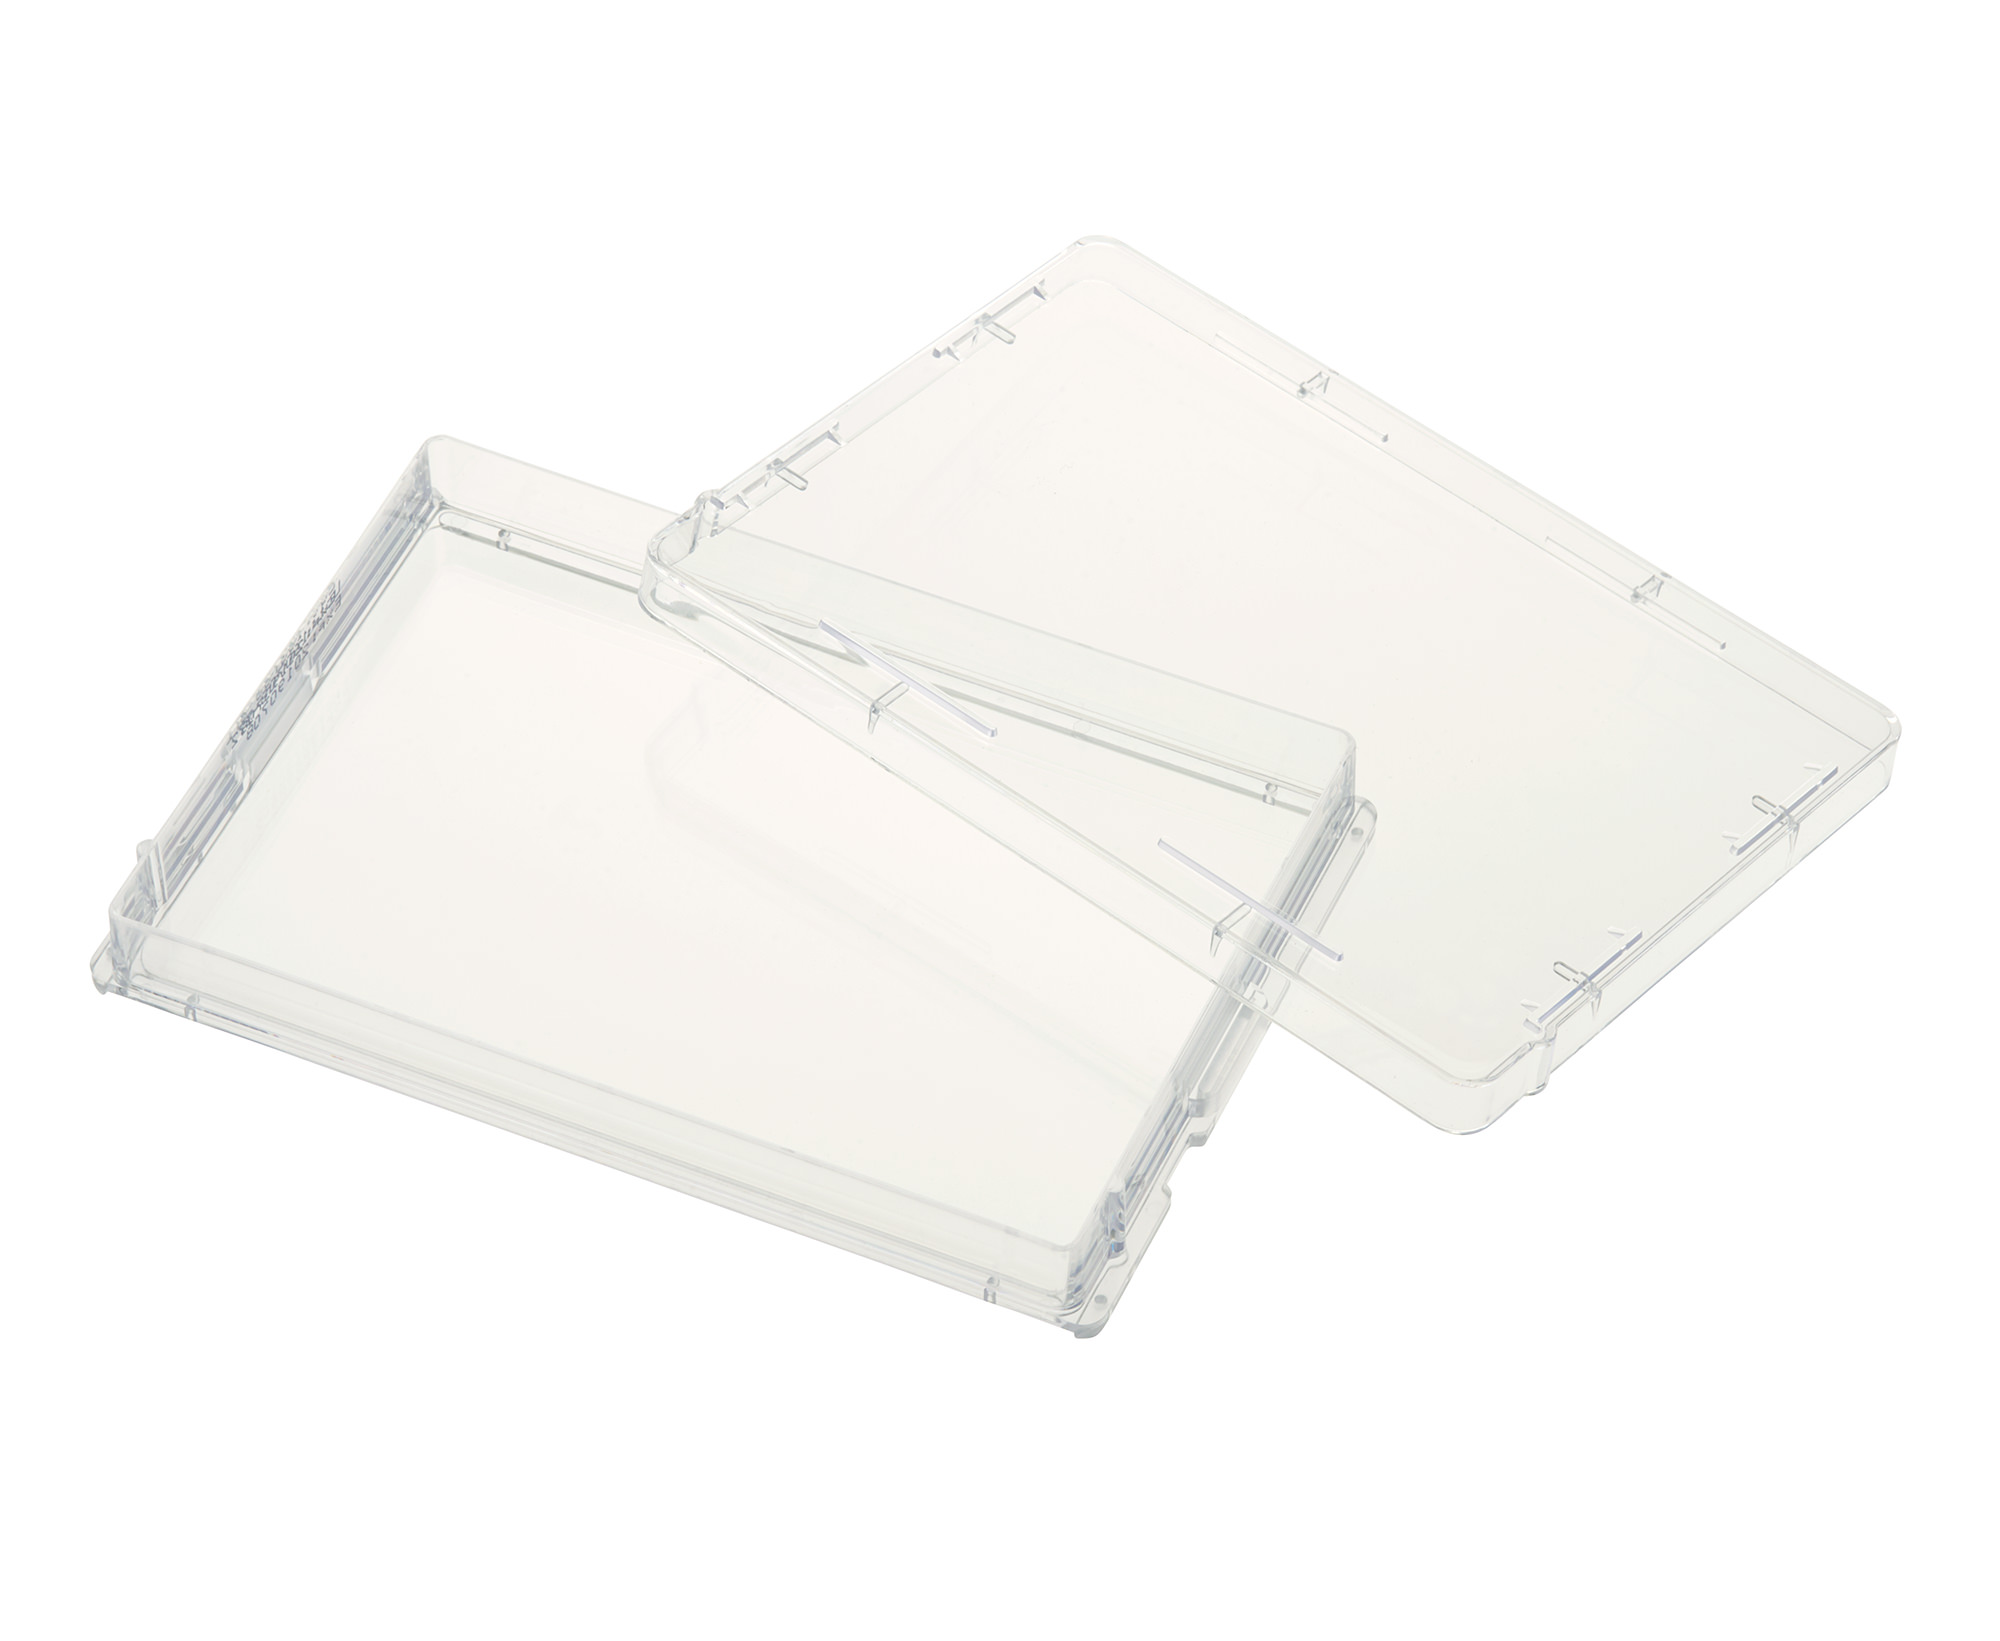 Round Bottom 1.5 mL 3.26 cm H Pack of 25 Polypropylene Non-Sterile Square Well CELLTREAT 229573 96 Deep Well Storage Plate 12.66 cm L 8.46 cm W 